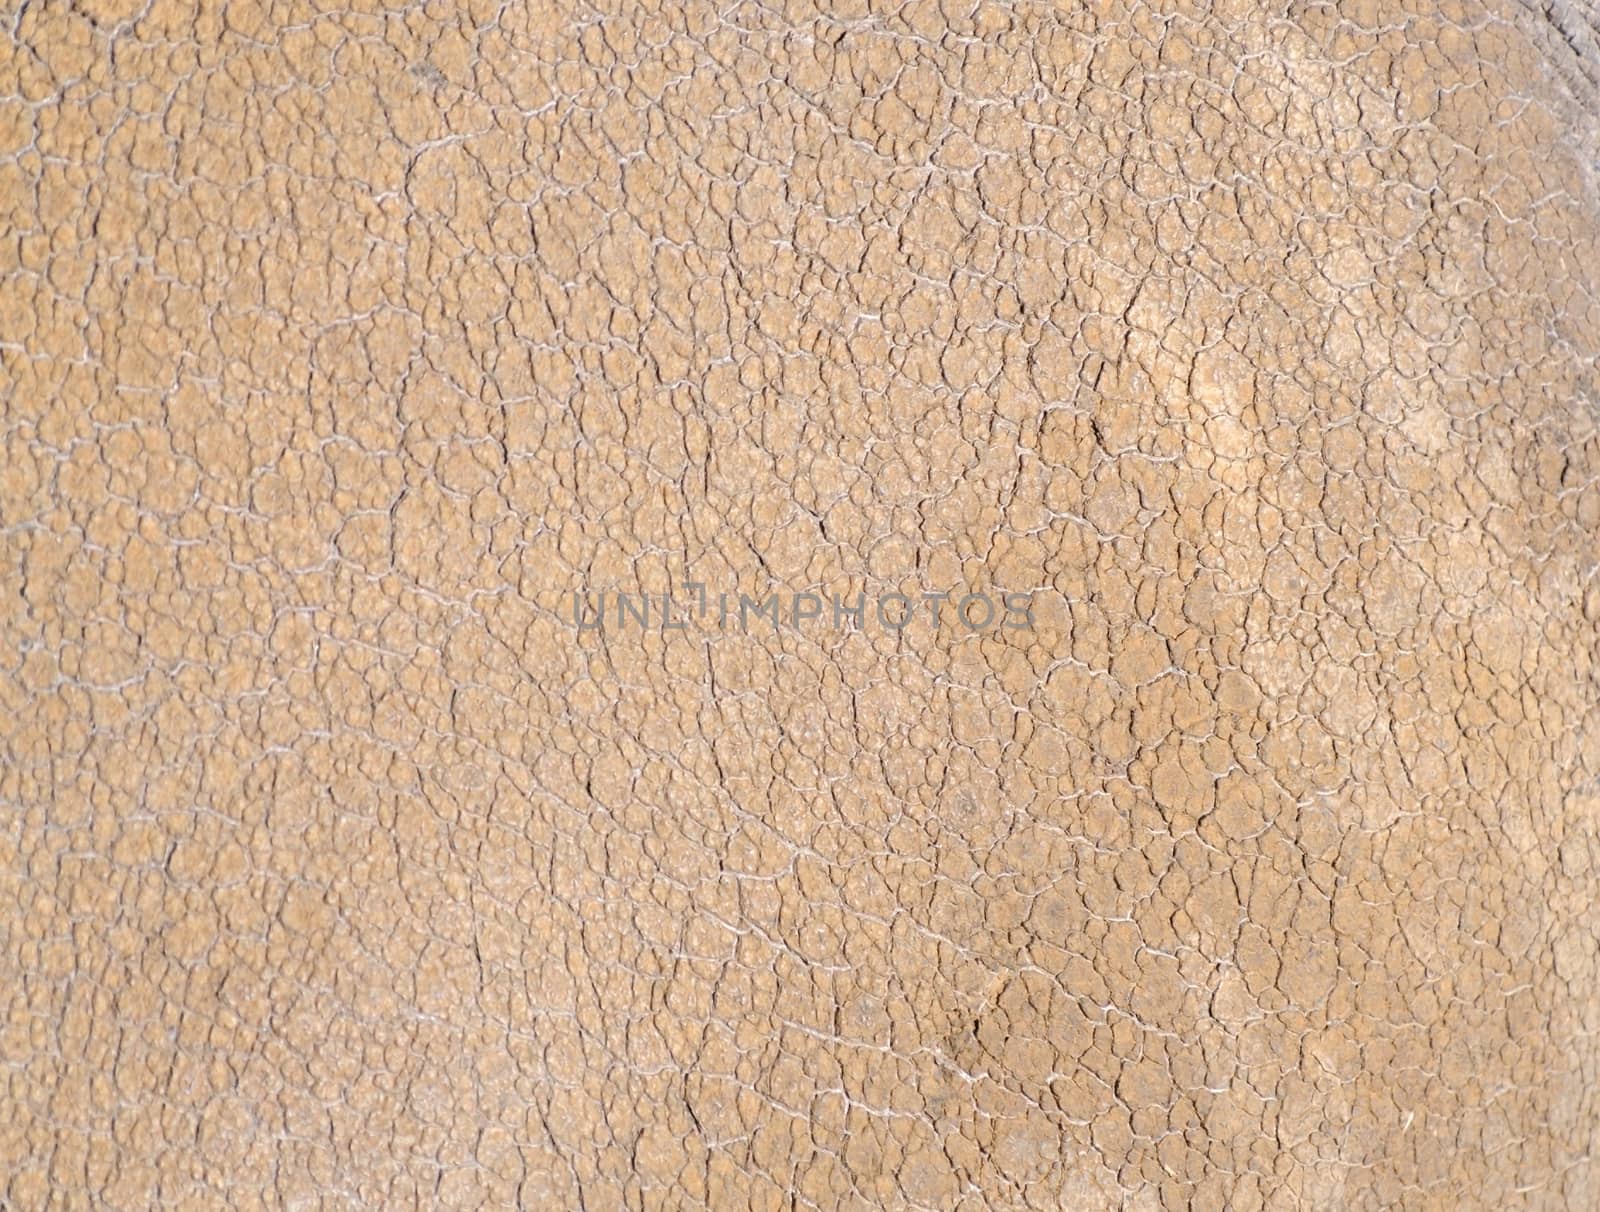 Closeup of rhinoceros skin texture for background